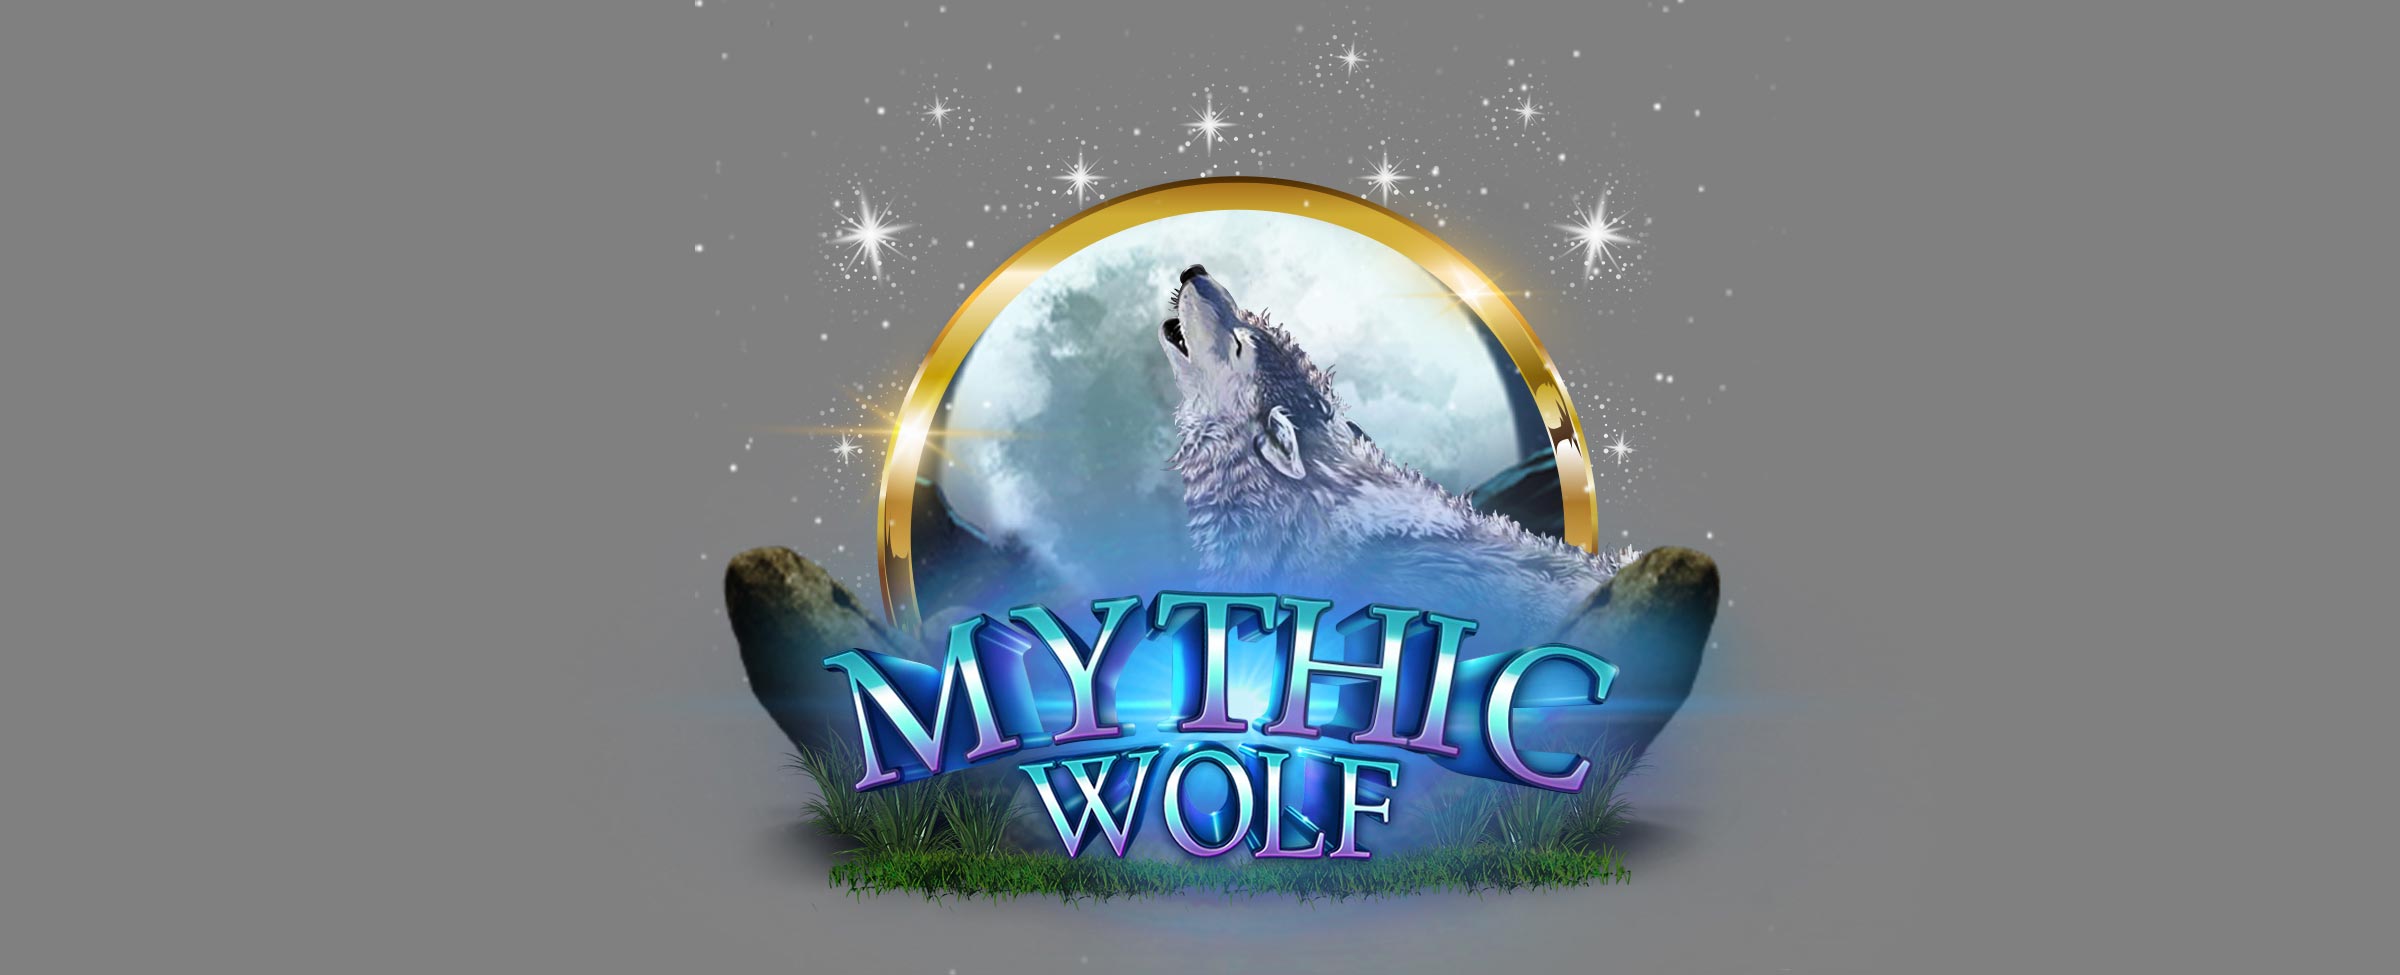 Play Mythic Wolf at Joe Fortune now!